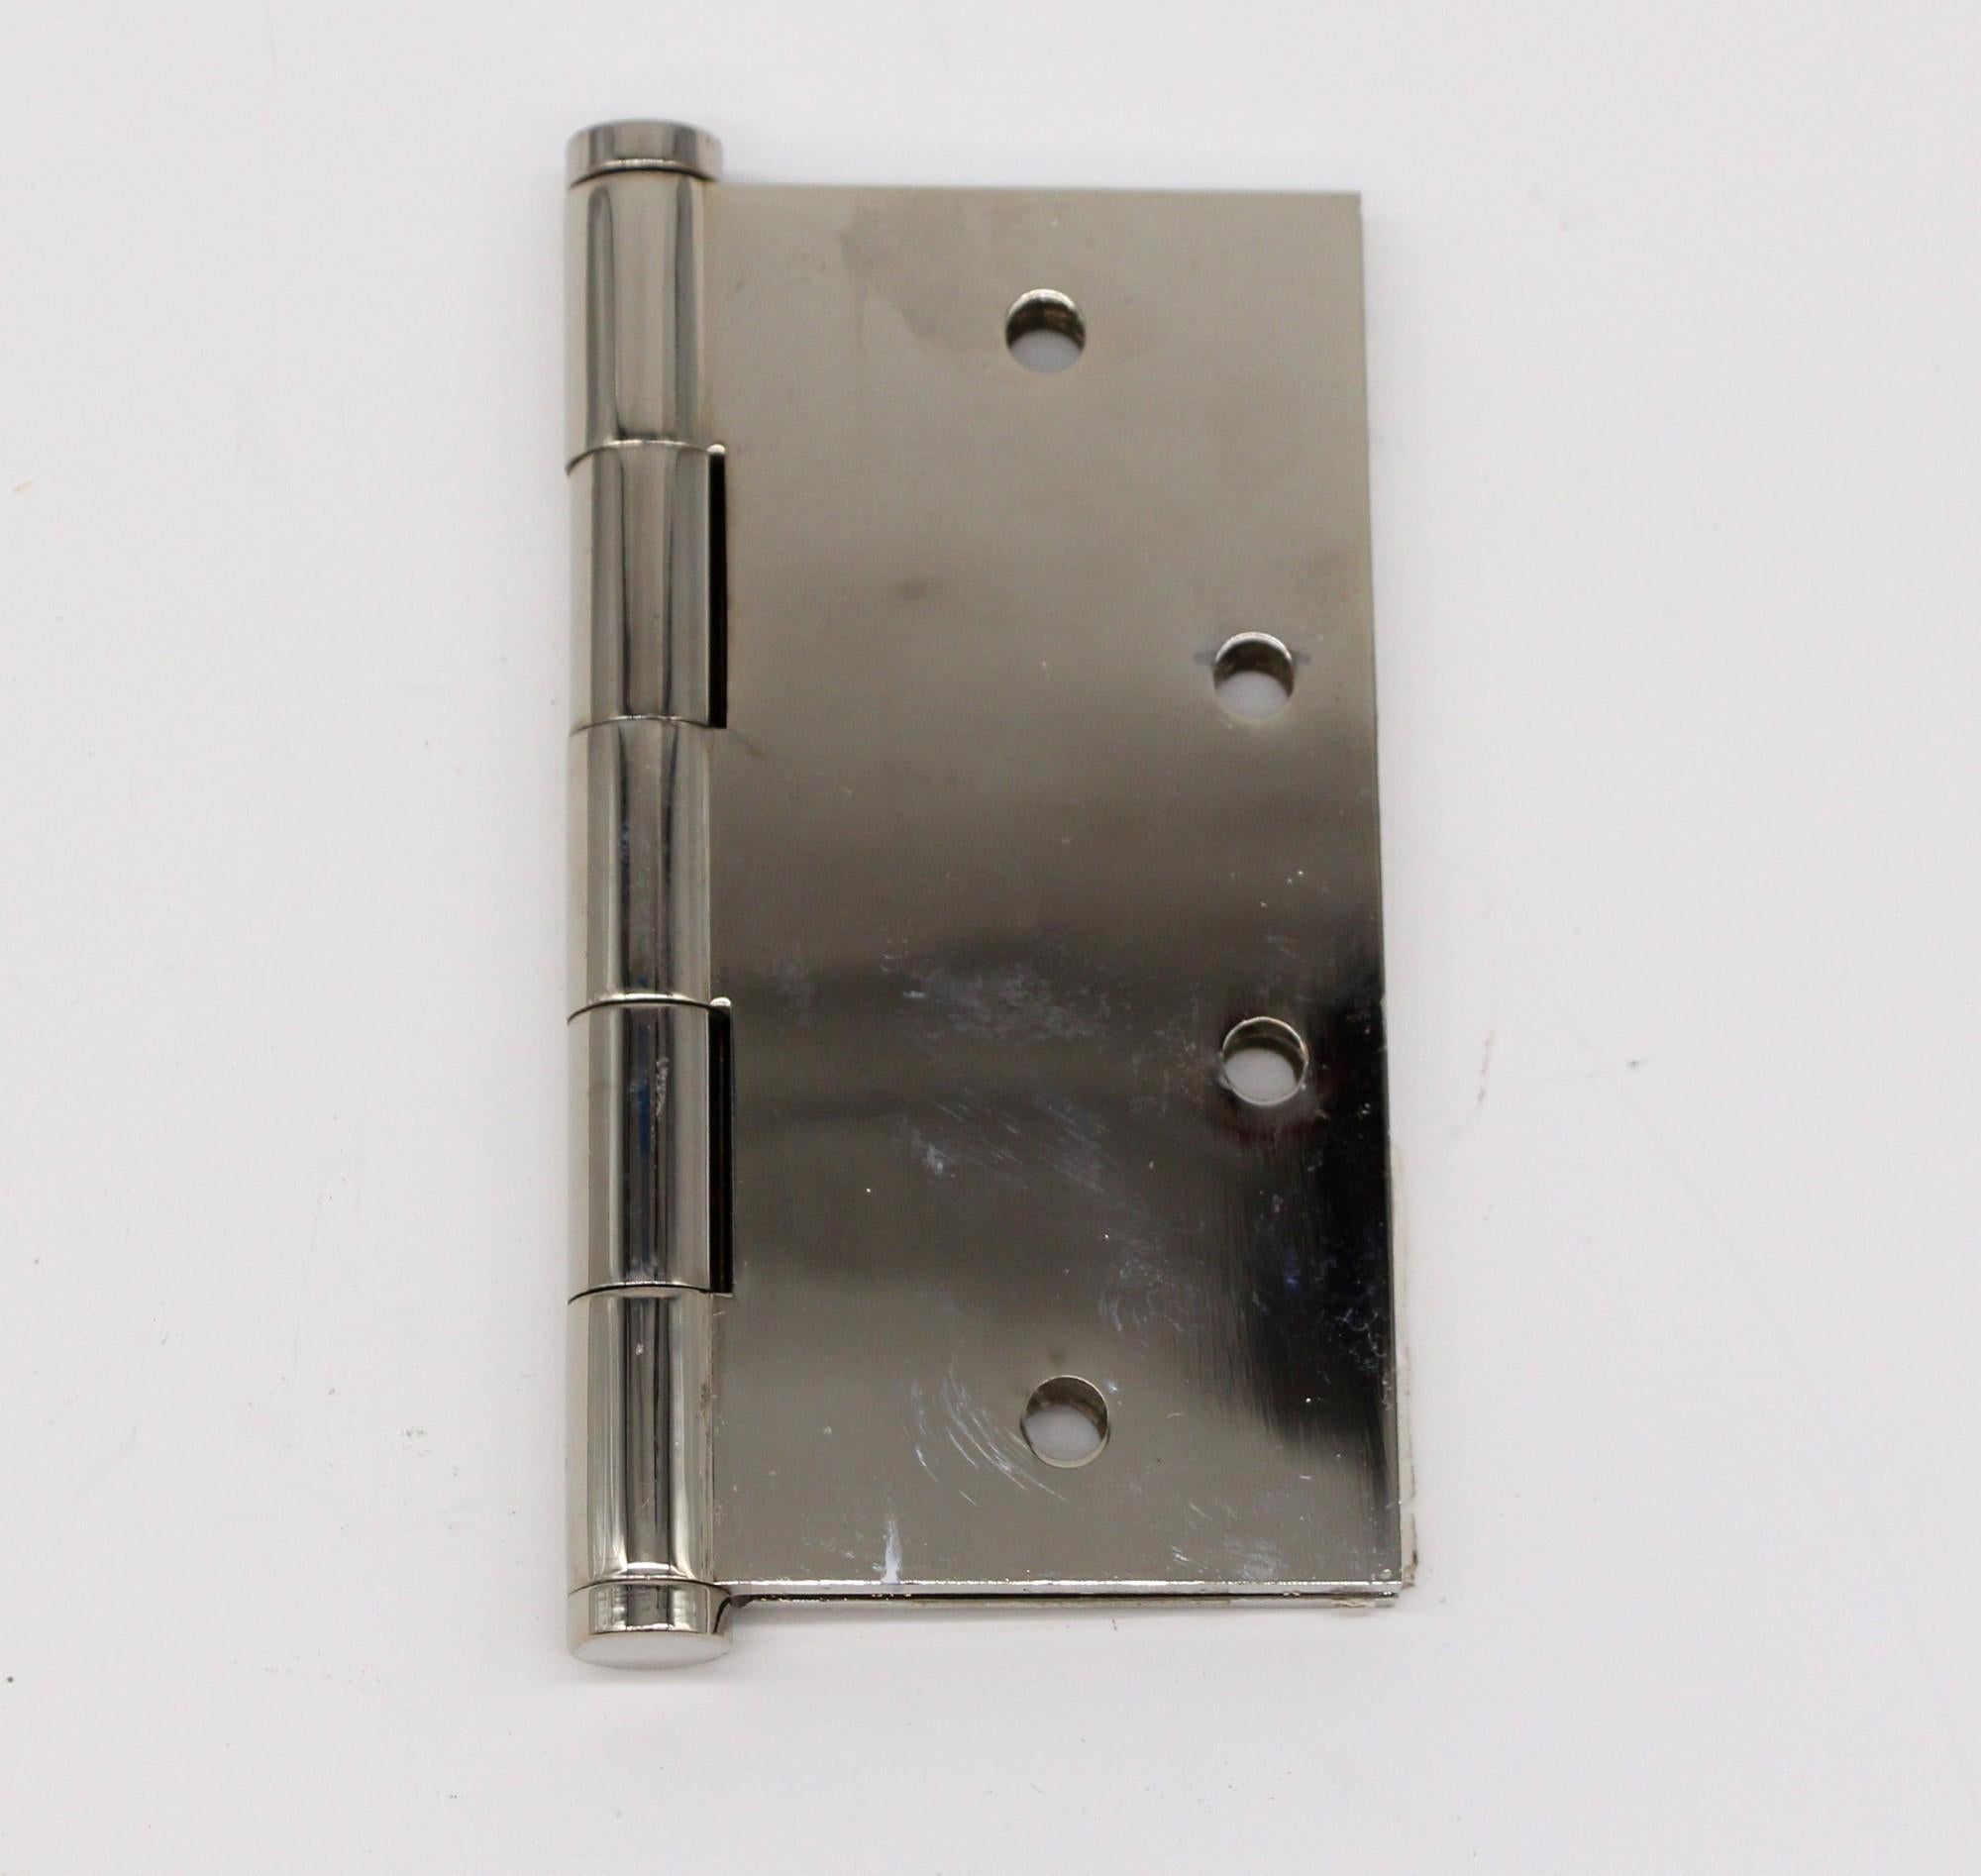 Baldwin classic chrome plated brass butt door hinge, 4.5 x 4.5. Has five knuckles, with a staggered hole pattern, and flat tips. Small qty. available at time of posting. Priced each. Please inquire. Please note, this item is located in our Scranton,